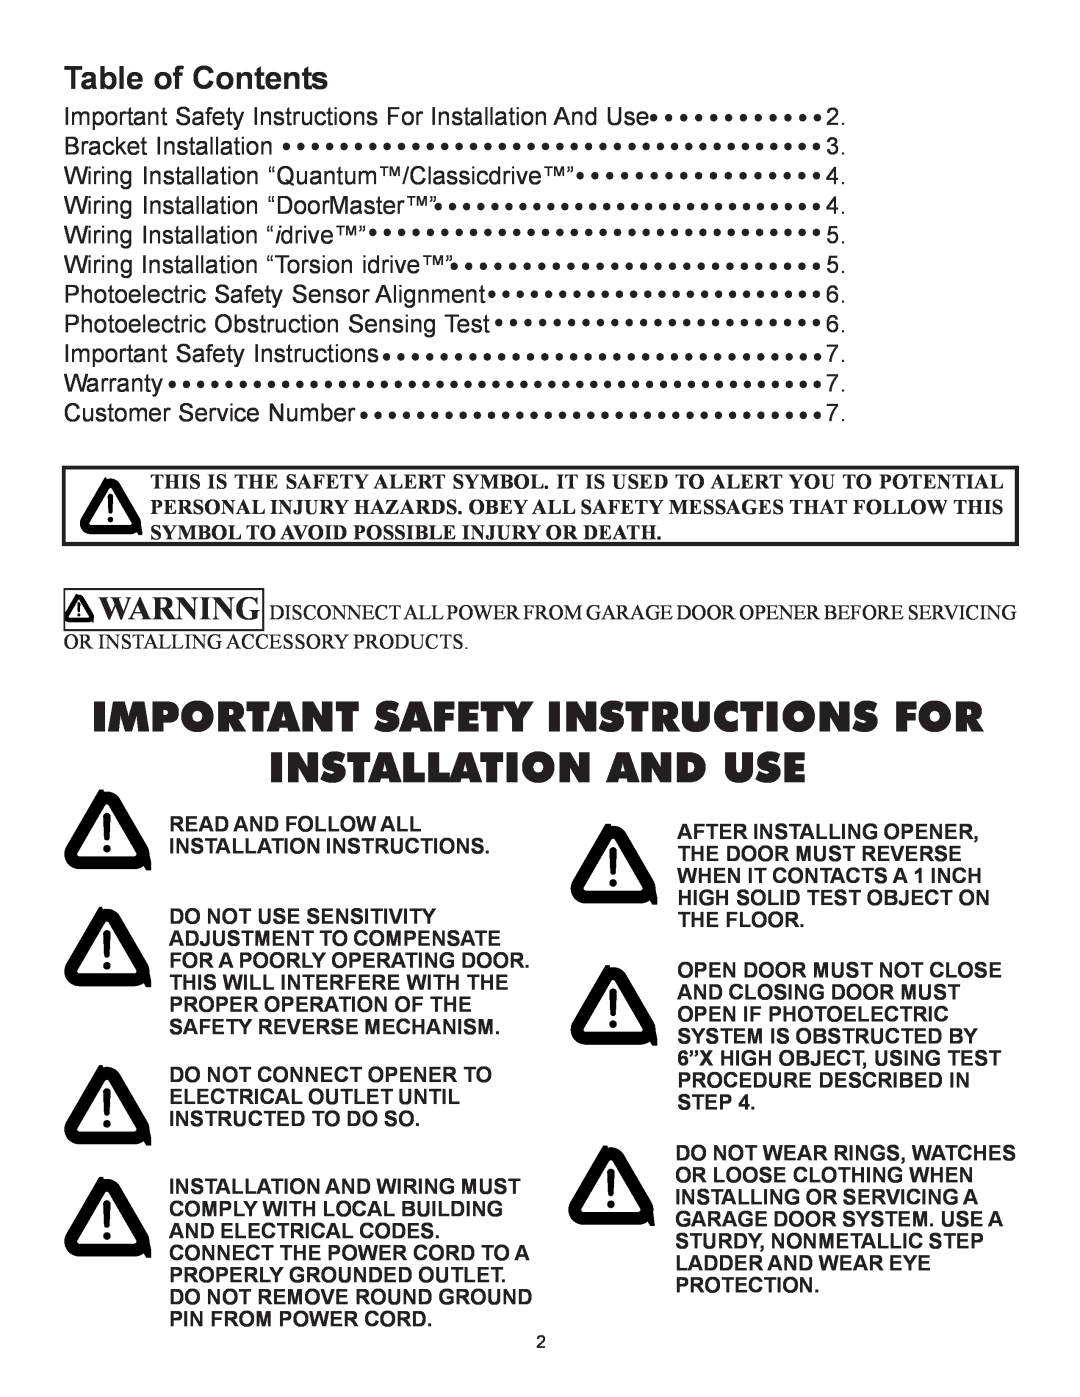 Wayne-Dalton 3651-372, 3012, 3014, 3750-372 Table of Contents, Important Safety Instructions For, Installation And Use 